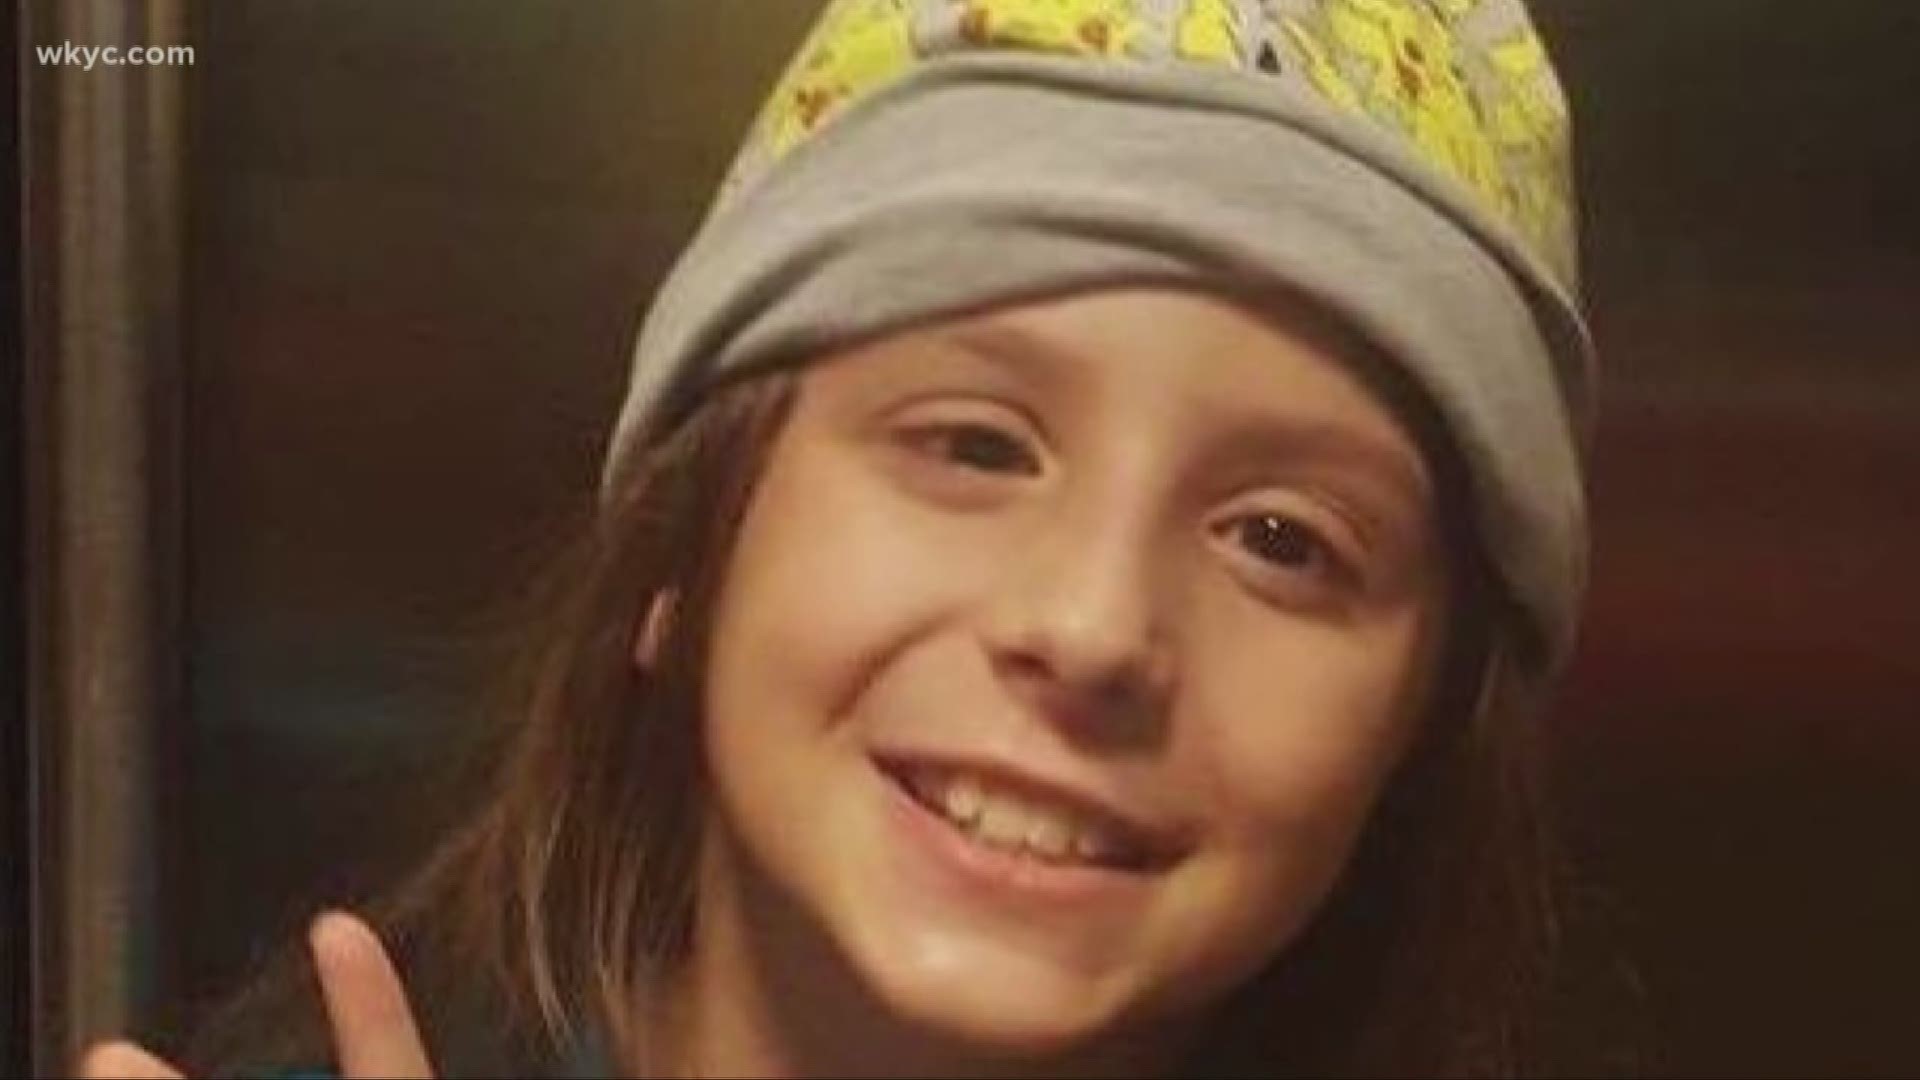 Jan. 7, 2019: Oliviah Hall, the 10-year-old Ashtabula girl who won the hearts of thousands of people, is being laid to rest after a battle with cancer.